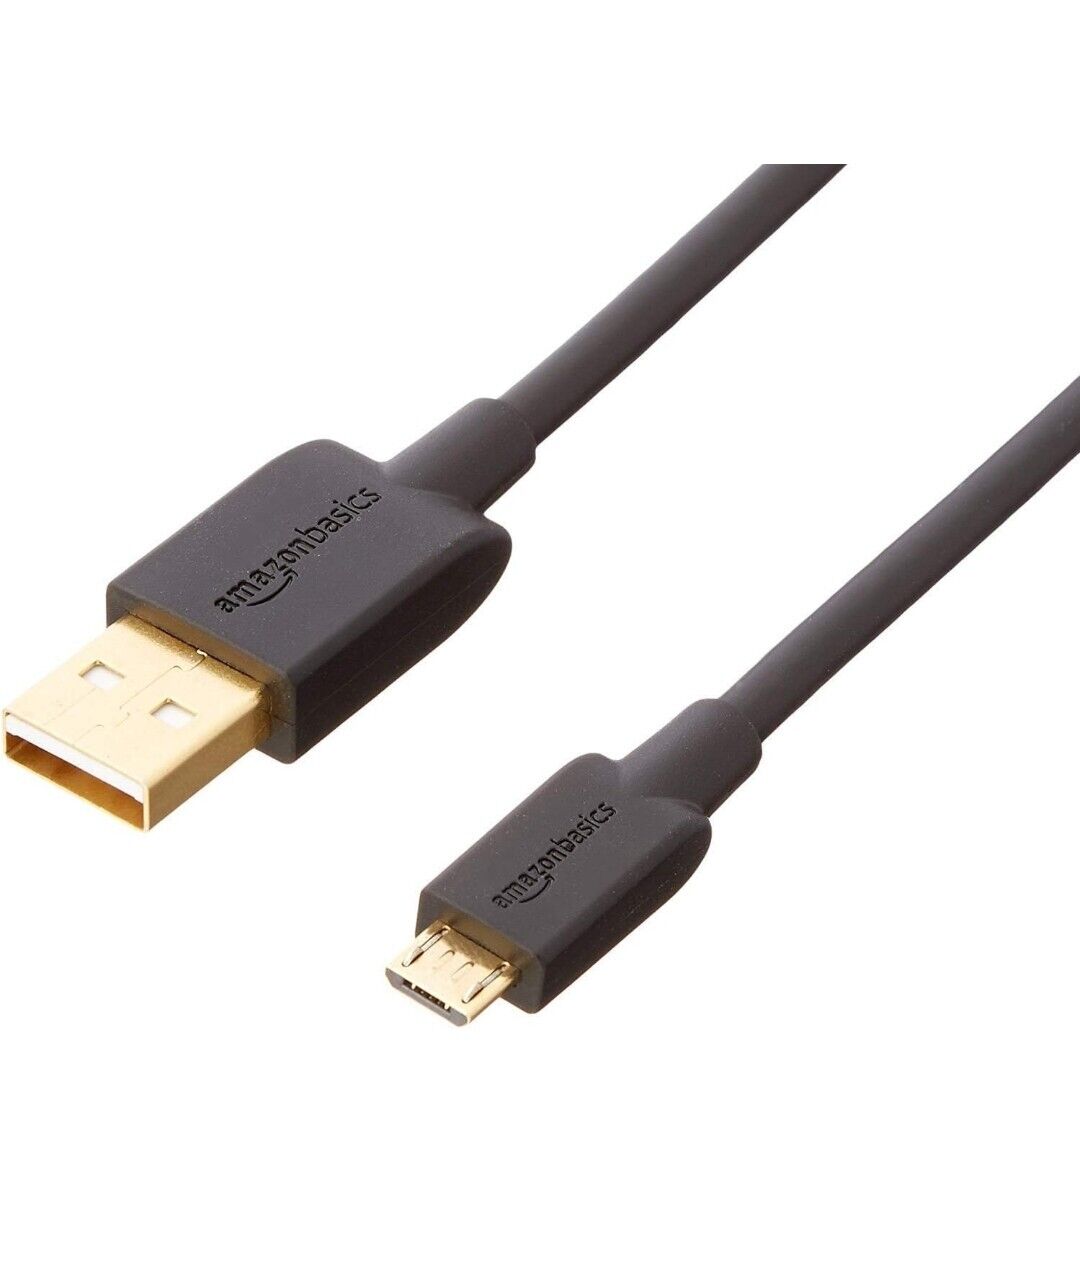 AmazonBasics 7T9MV4 6 ft USB 2.0 A-Male to Micro B Charger Cable - Black